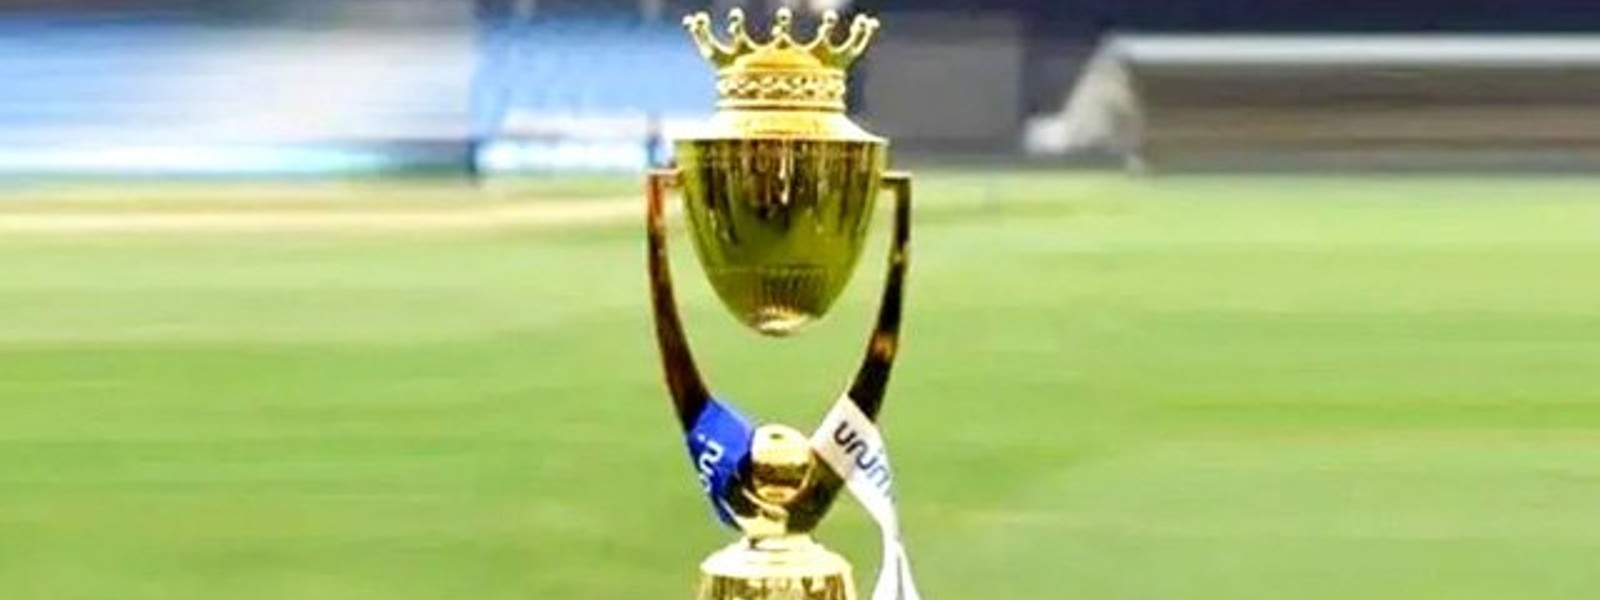 Asia Cup 2022: Sri Lanka to face Afghanistan in Dubai today (27)